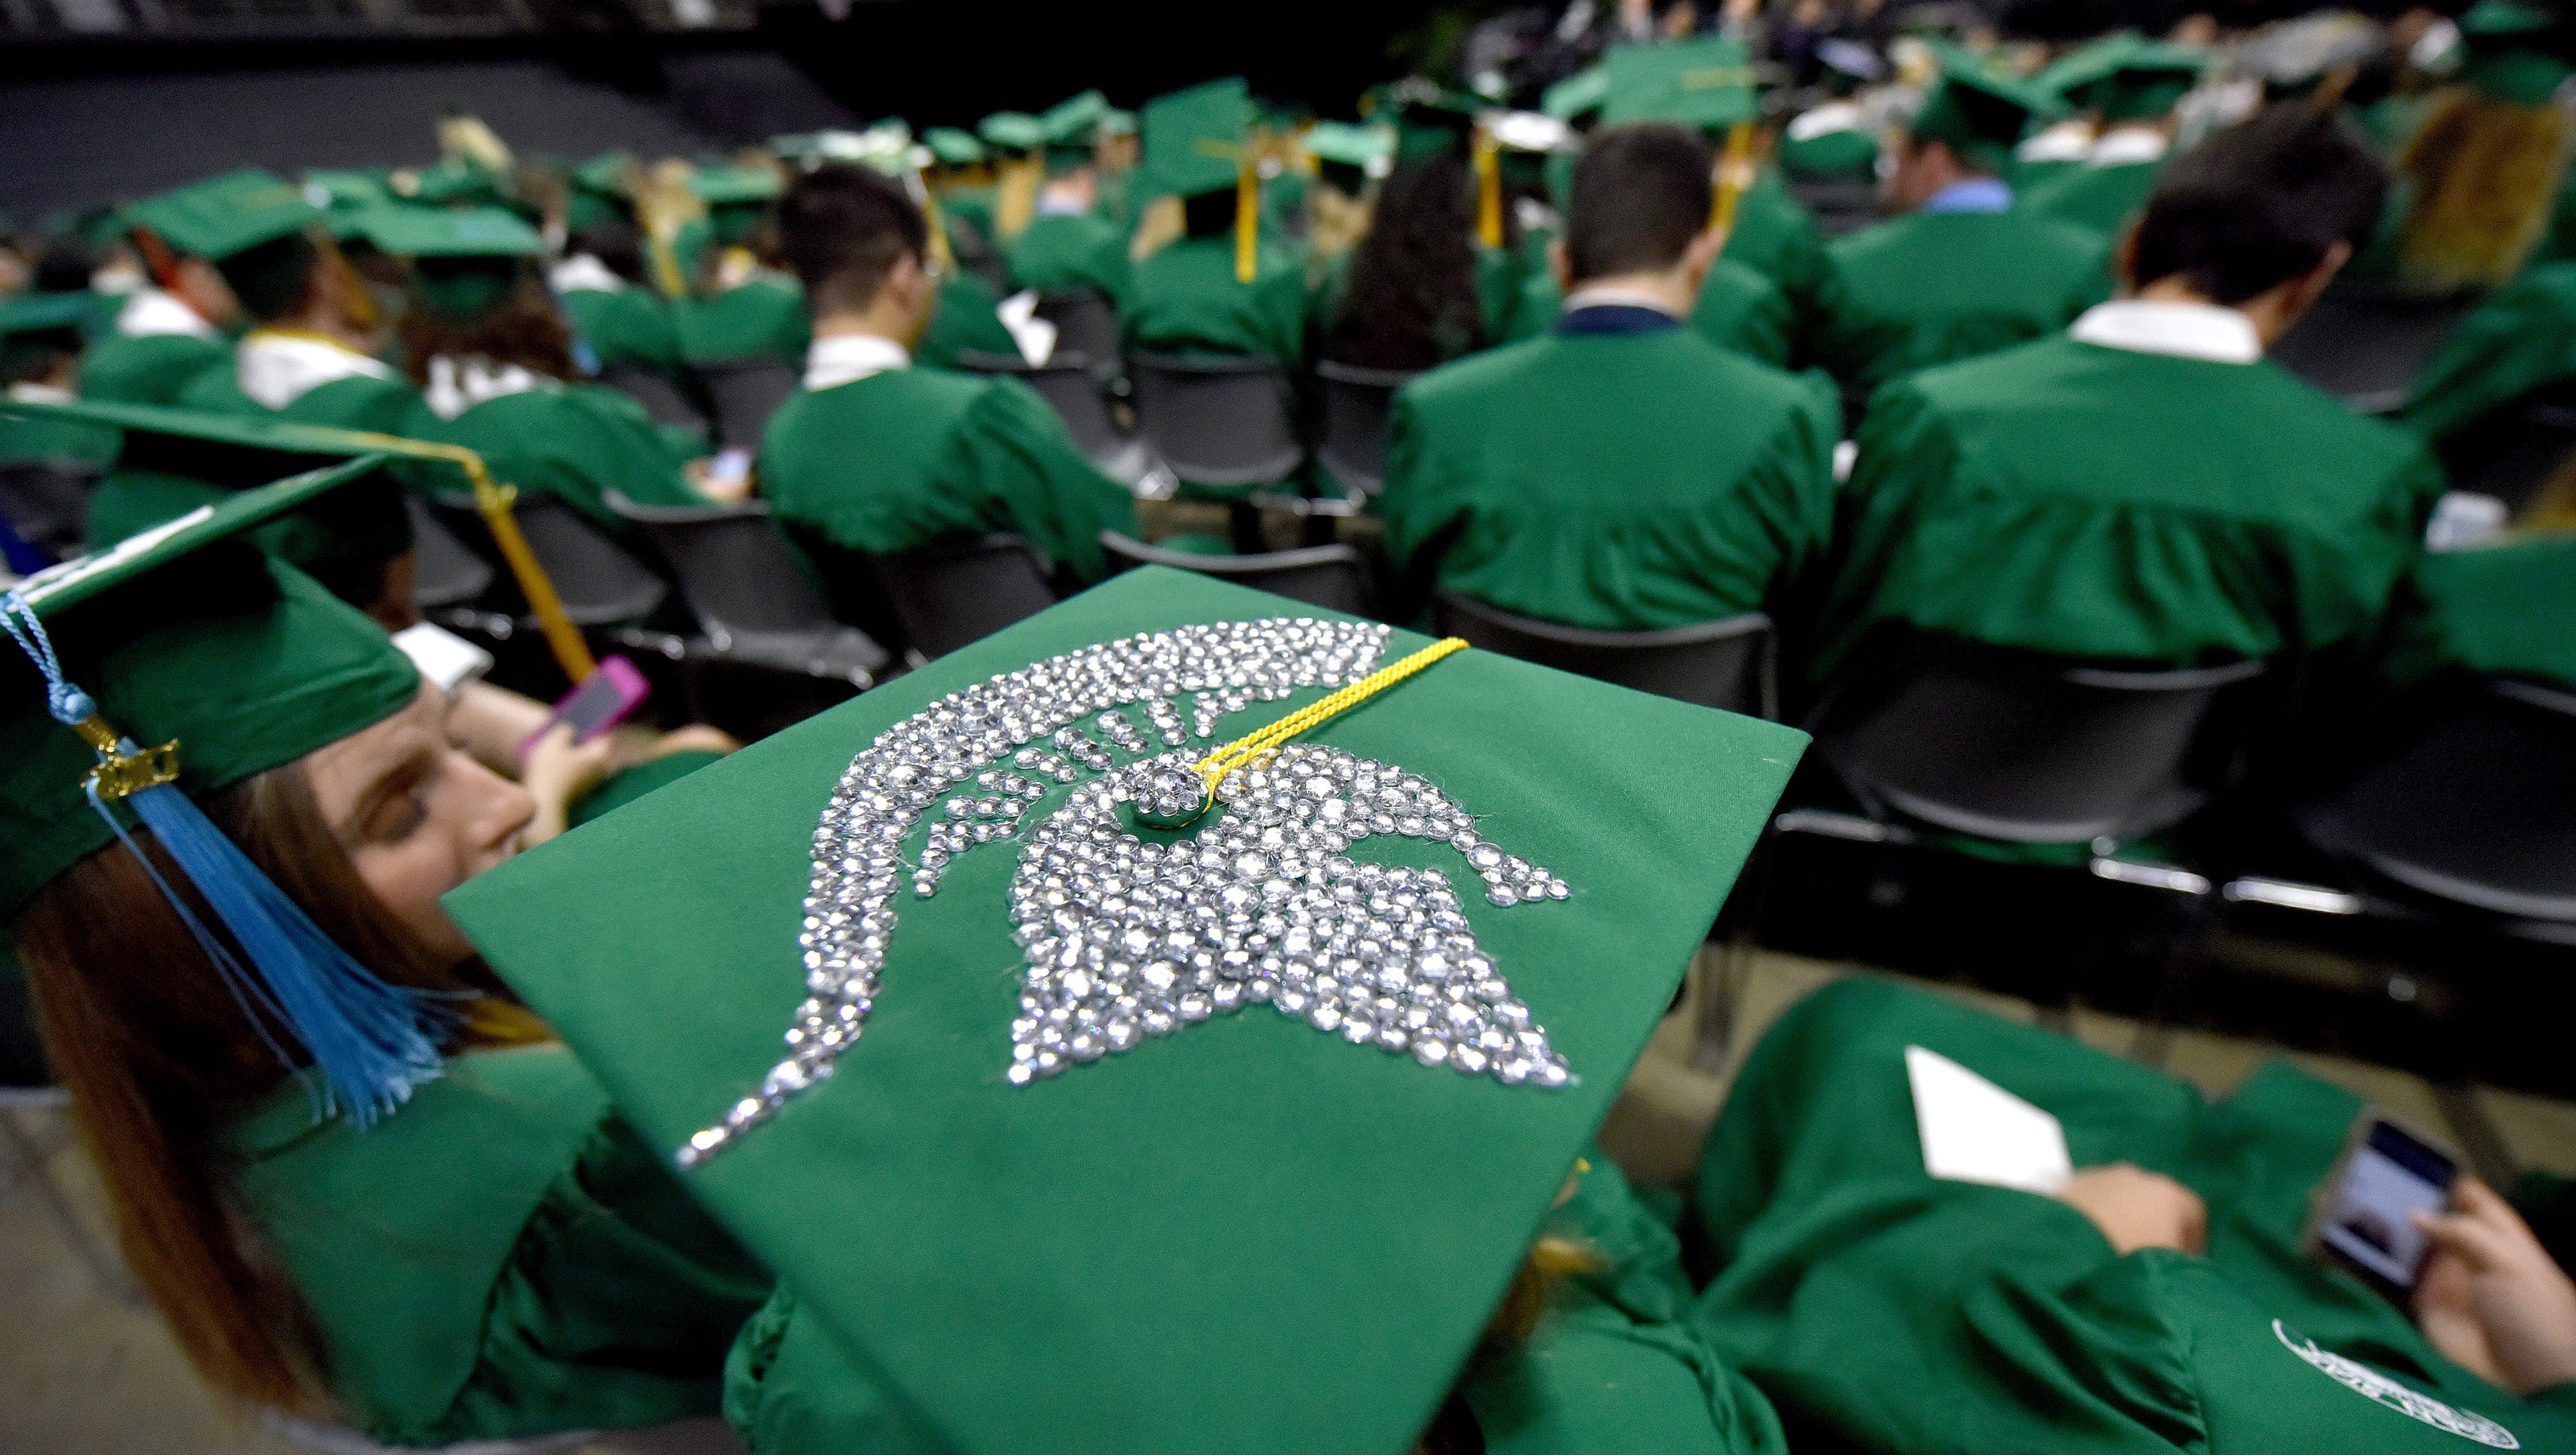 MSU to hold outdoor ceremonies for spring 2021 graduation class